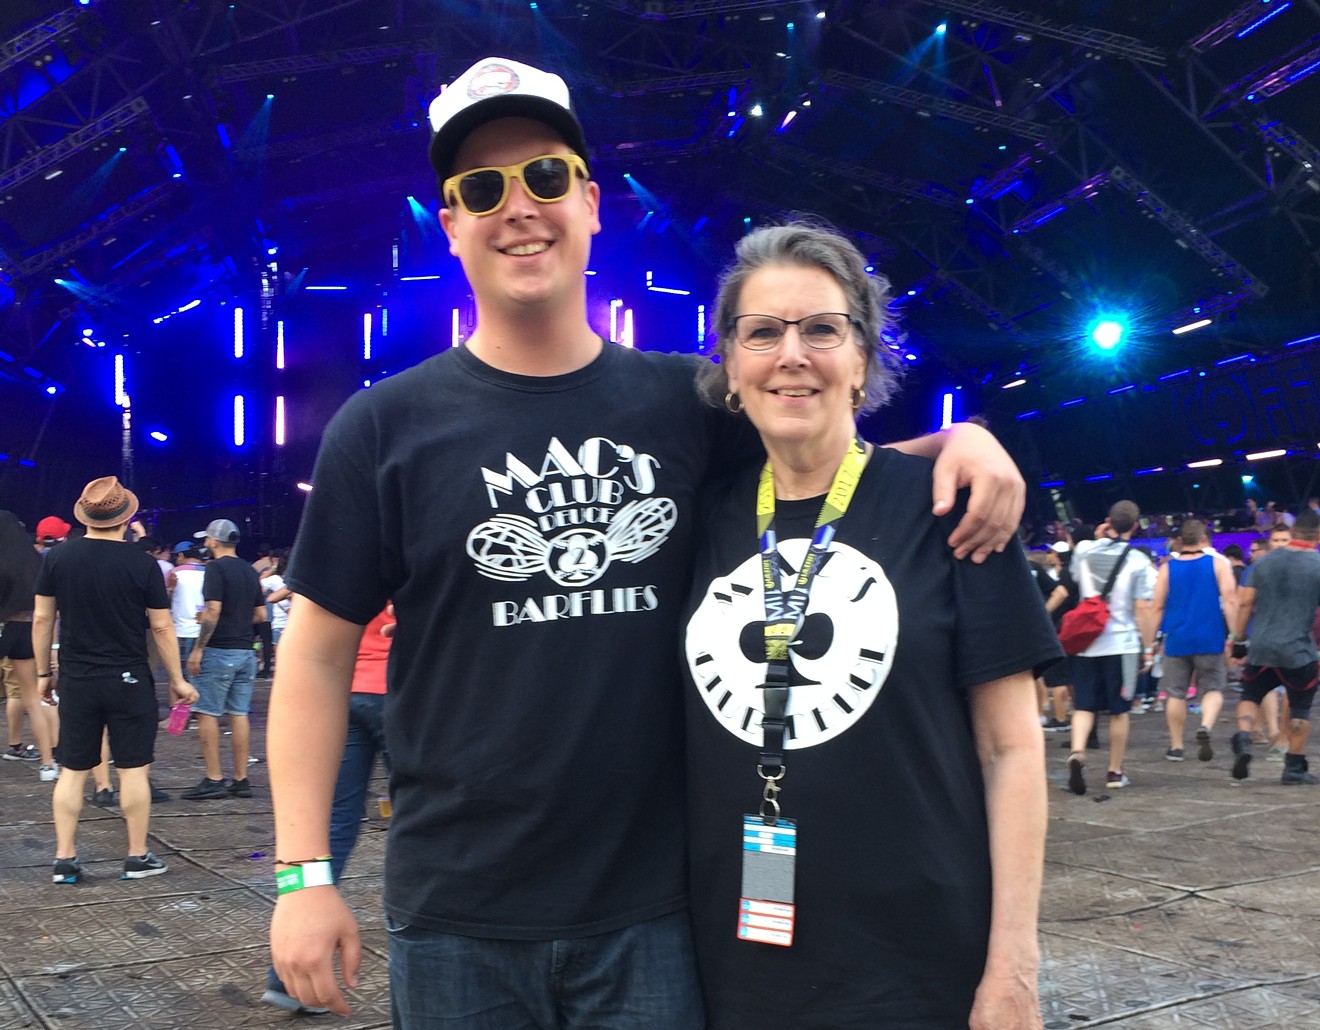 Thomas Marshall and his mom Pam McGhee at Ultra last weekend.